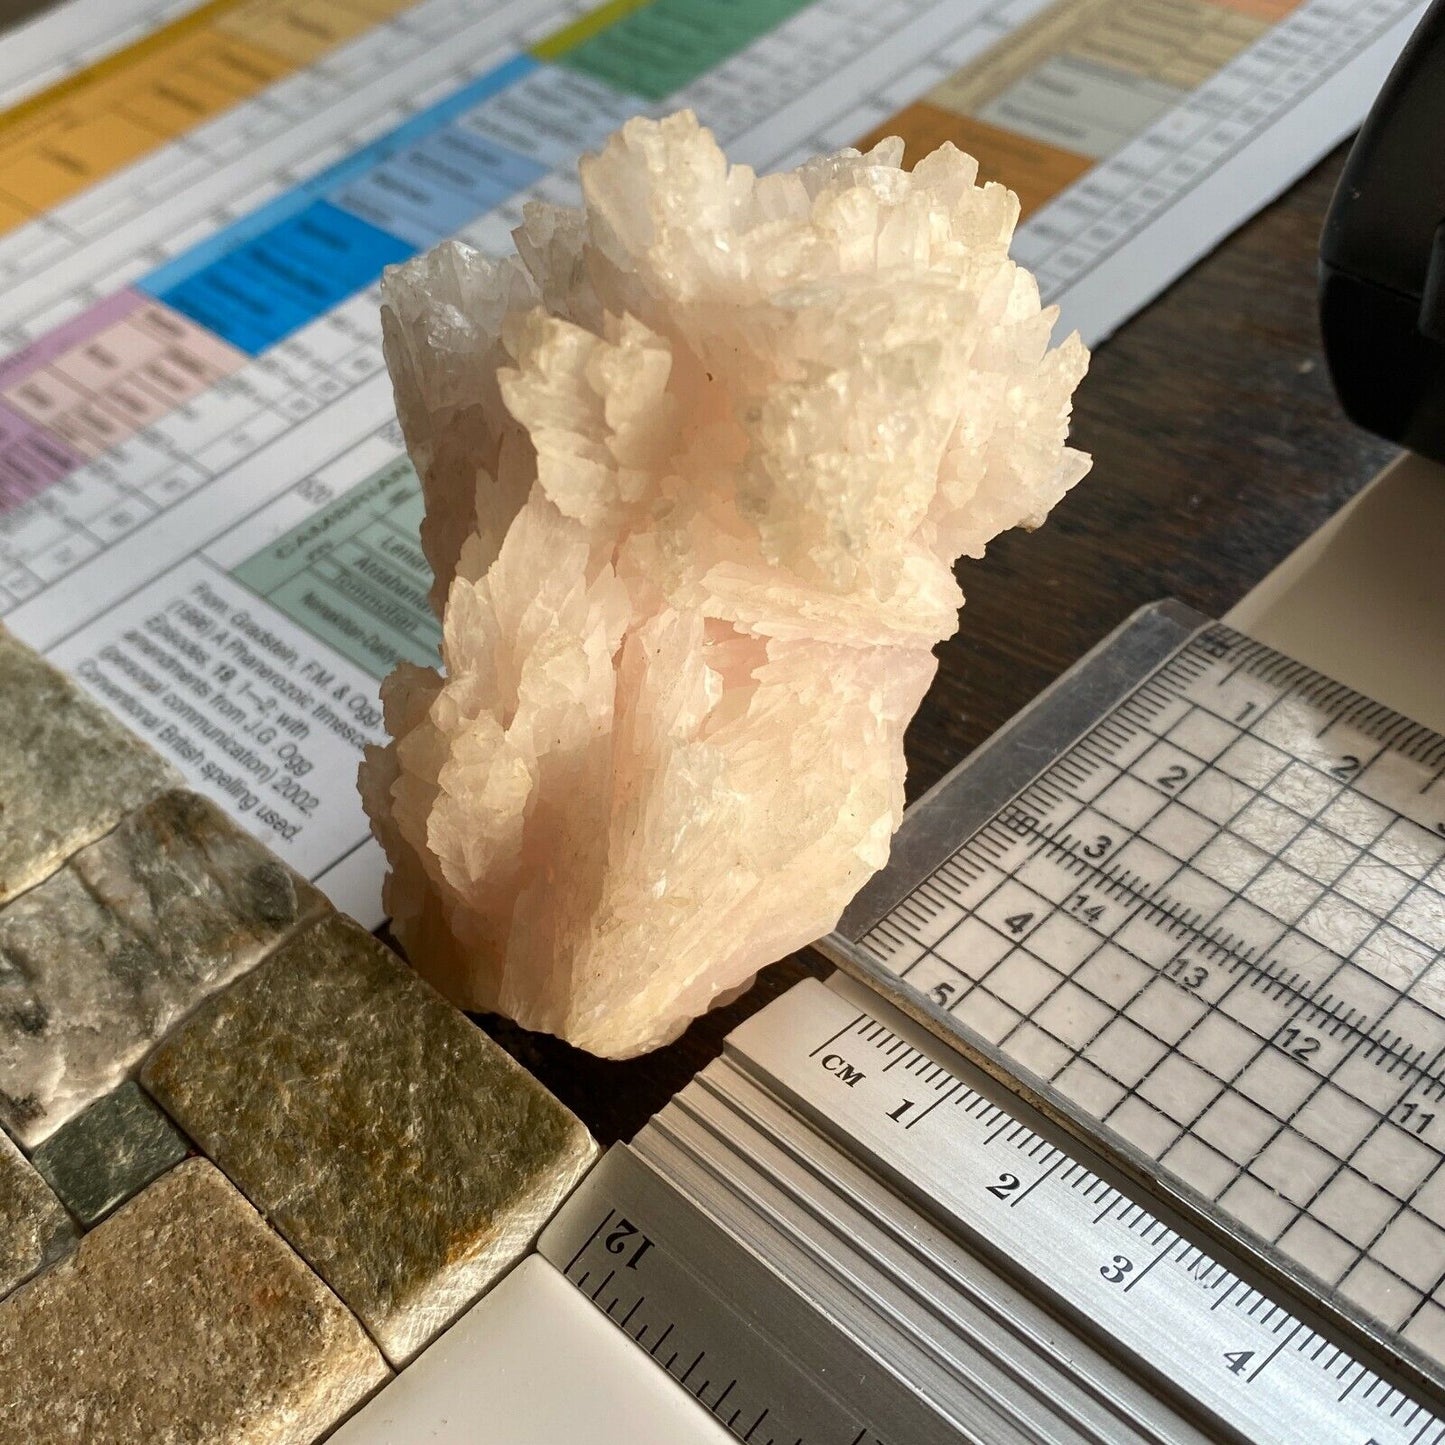 CALCITE EXCEPTIONAL SPECIMEN FROM THE MENDIPS SOMERSET 203g MF240